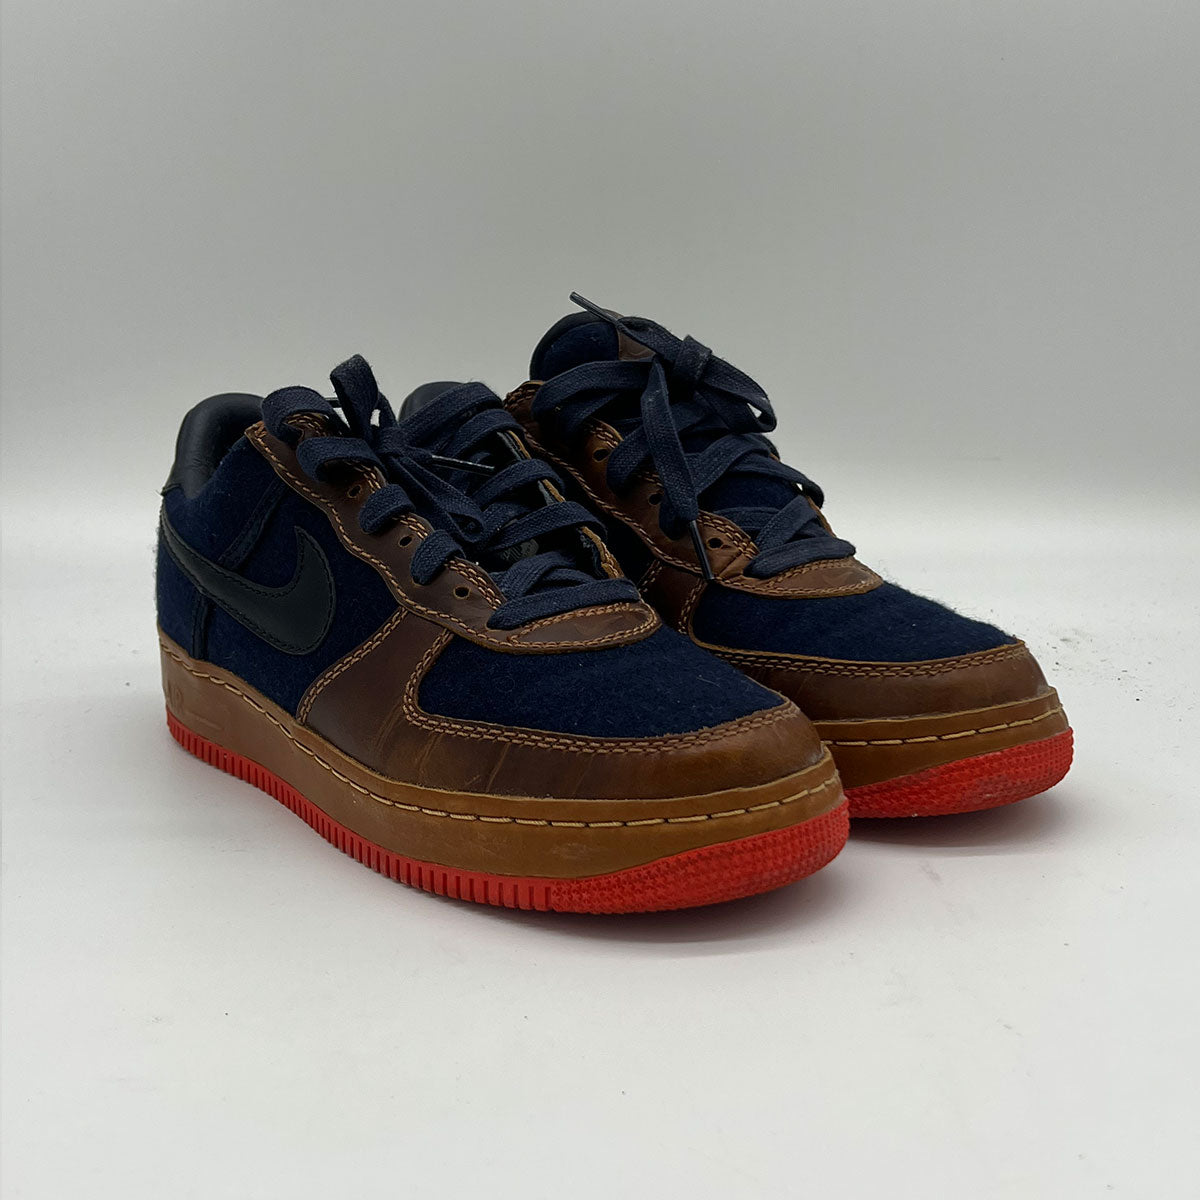 Nike Women's Air Force 1 Low Insideout (Pre-Owned) size 11.5